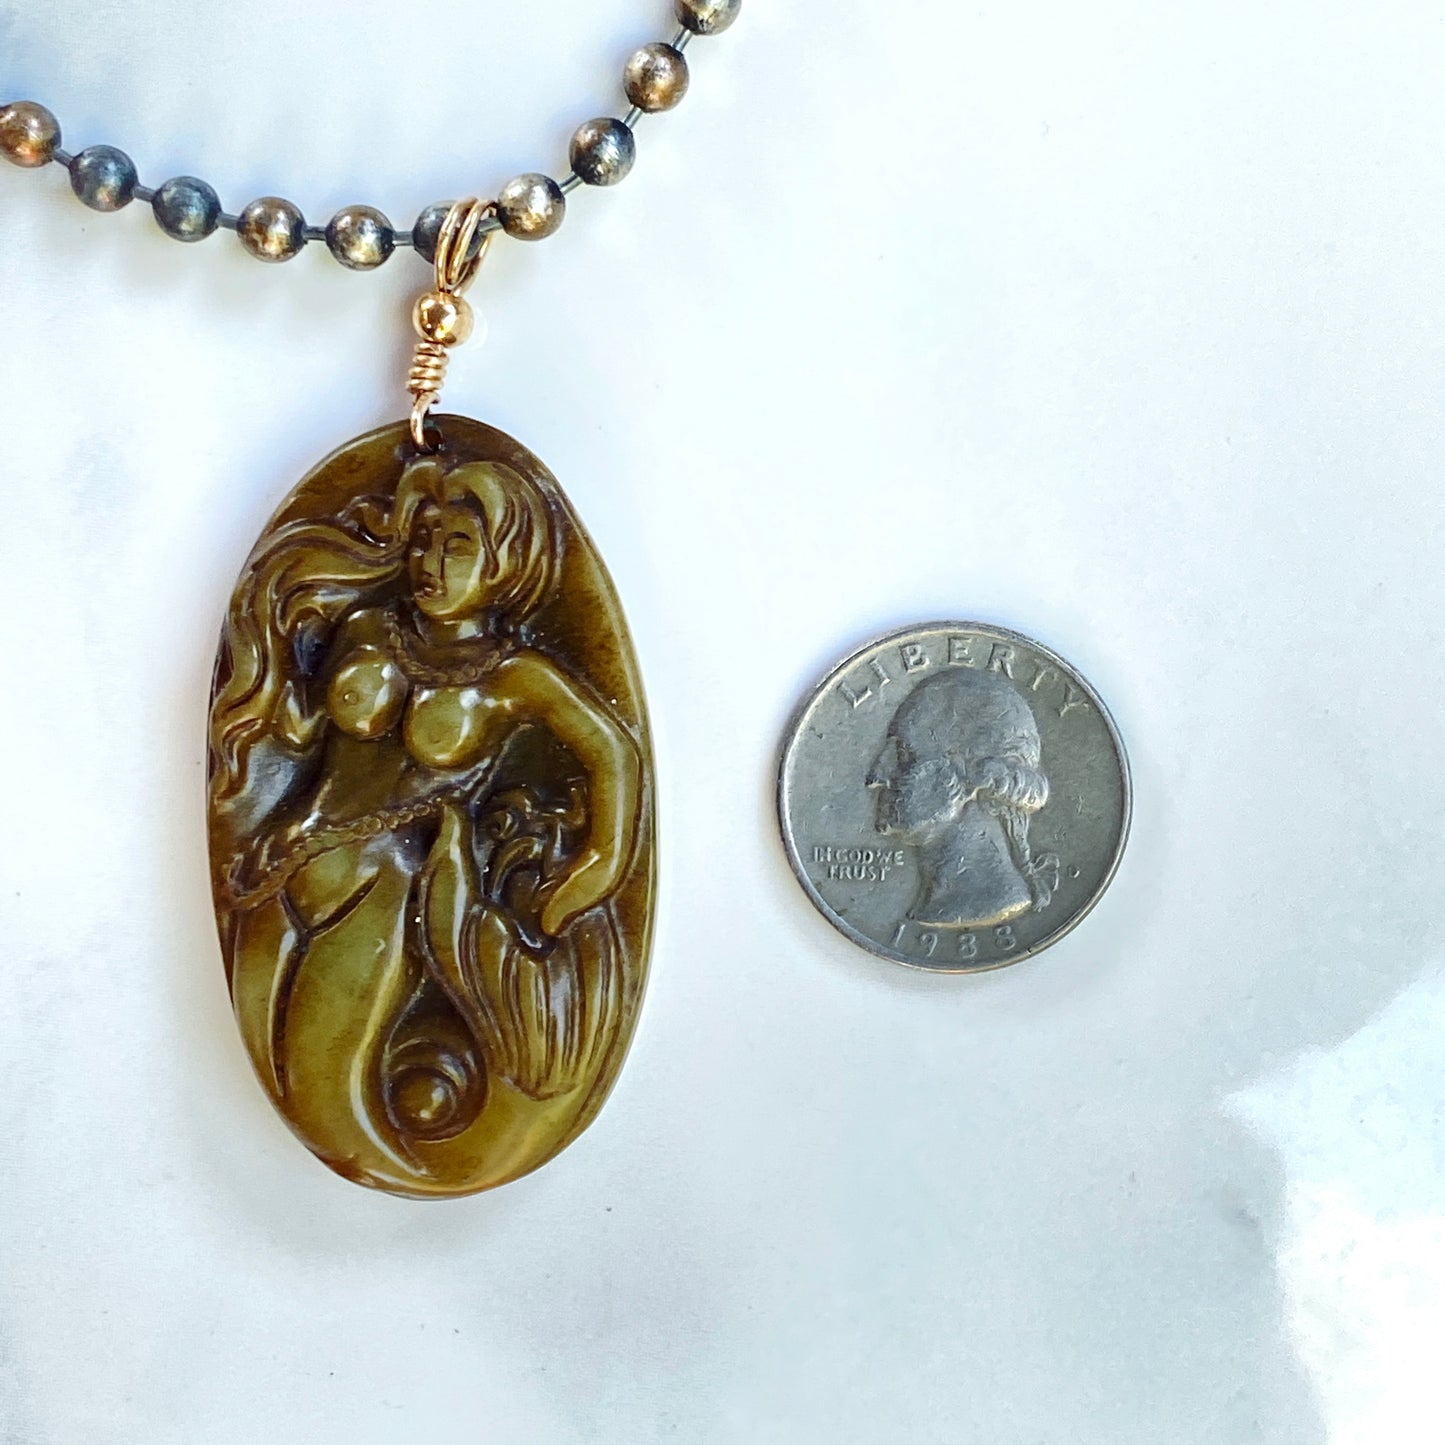 Jade Gemstone Carved Mermaid Pendant Hand Wrapped on Copper Chain